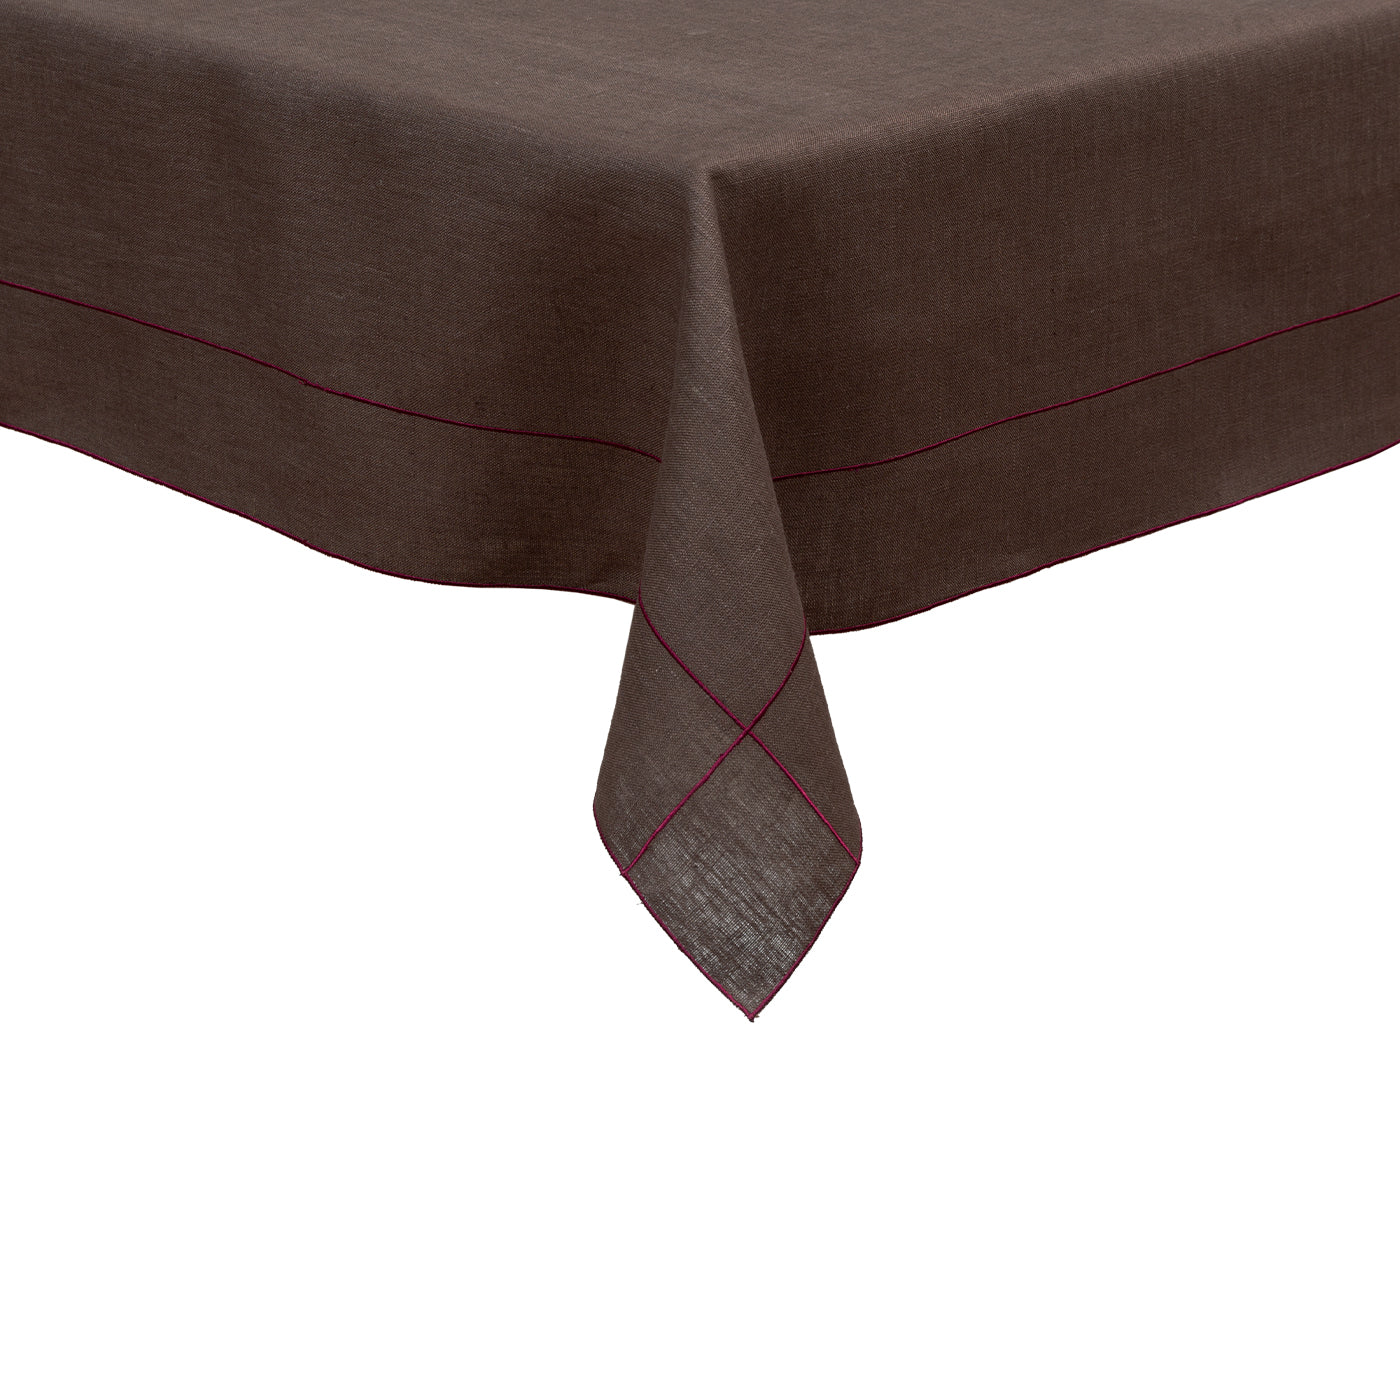 Tulip Frame Set of 1 Tablecloth and 8 Napkins - Alternative view 3